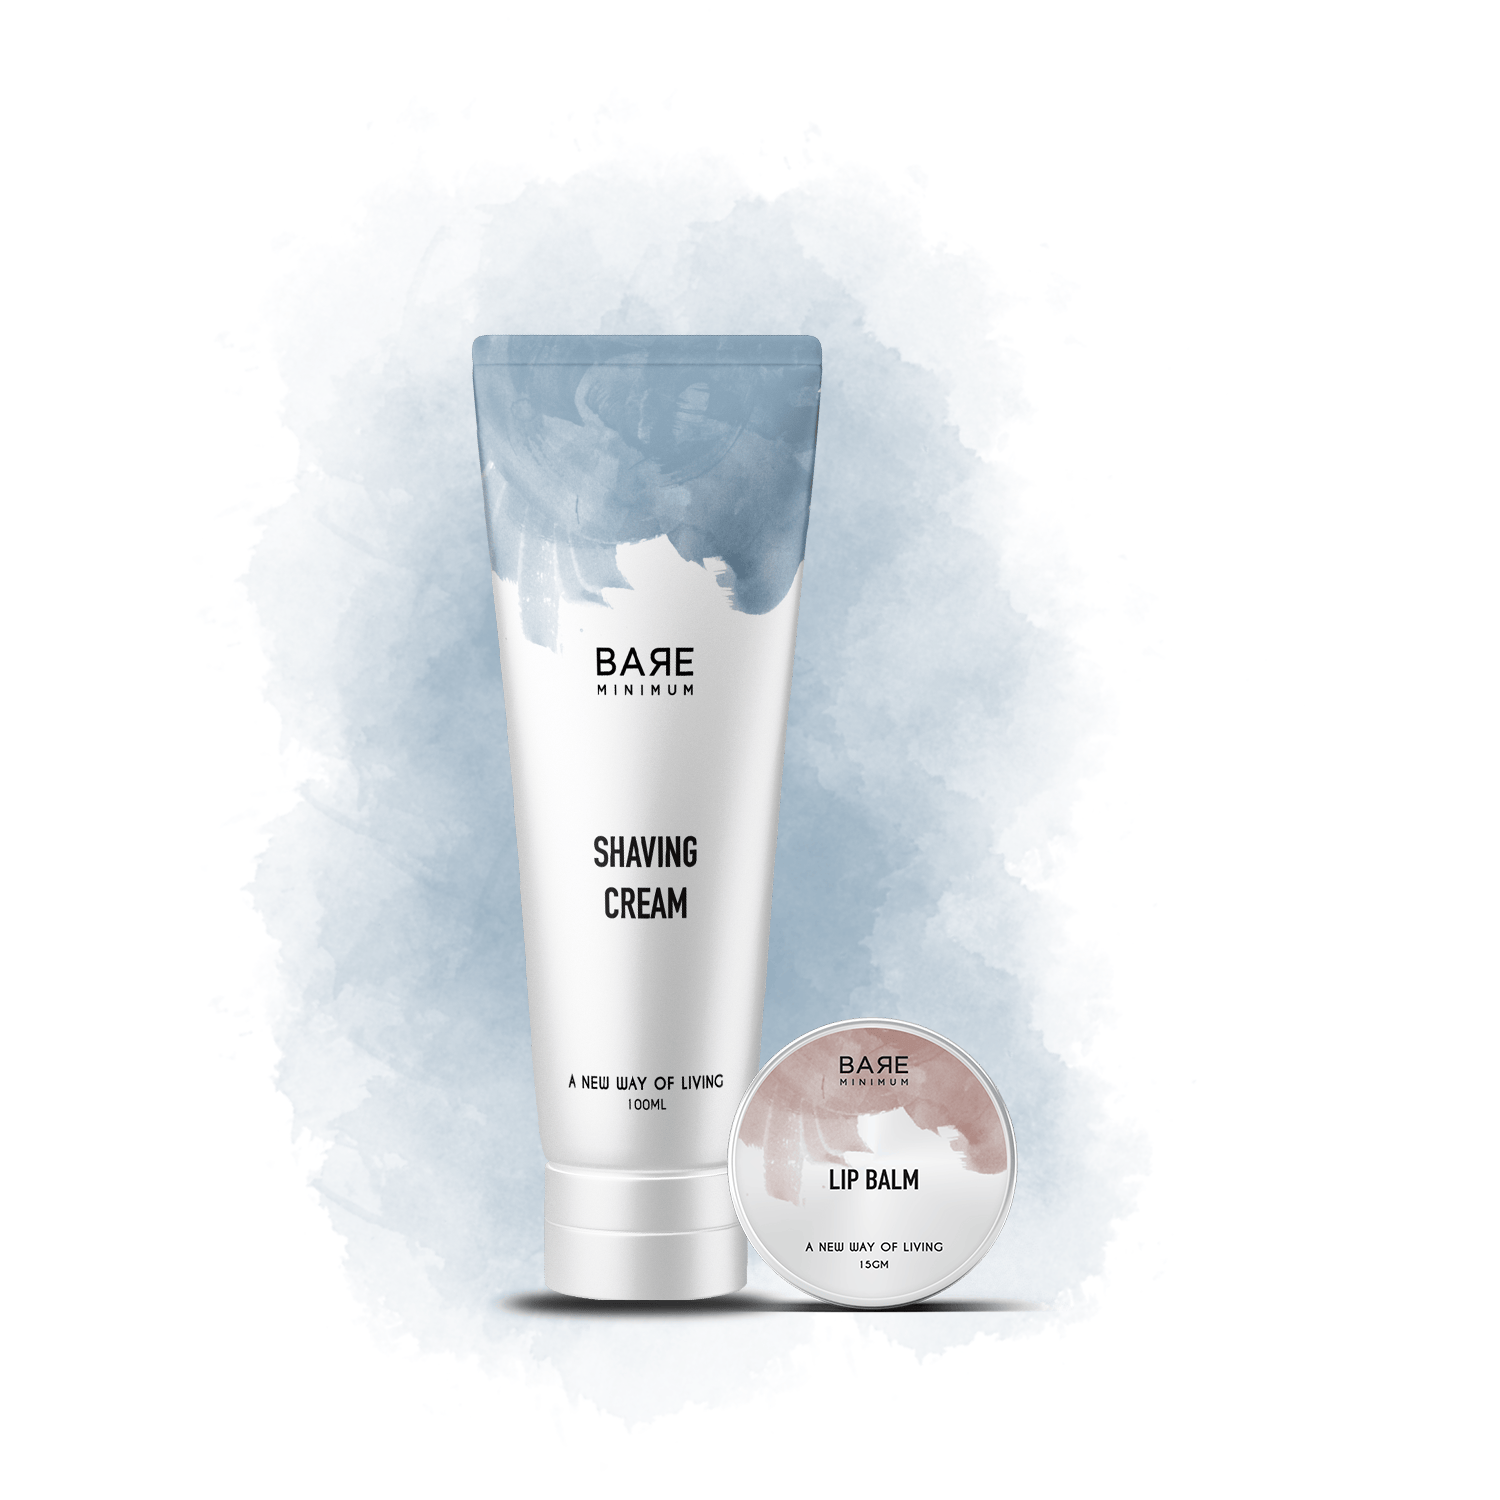 Bare Minimum | Combo of Shaving Cream + Lip Balm | With The Extracts Of Sandalwood And Holy Basil | pH-Balanced Formula | Gender-Neutral | For All Skin Types (Shaving Cream 100g + Lip Balm 15g )